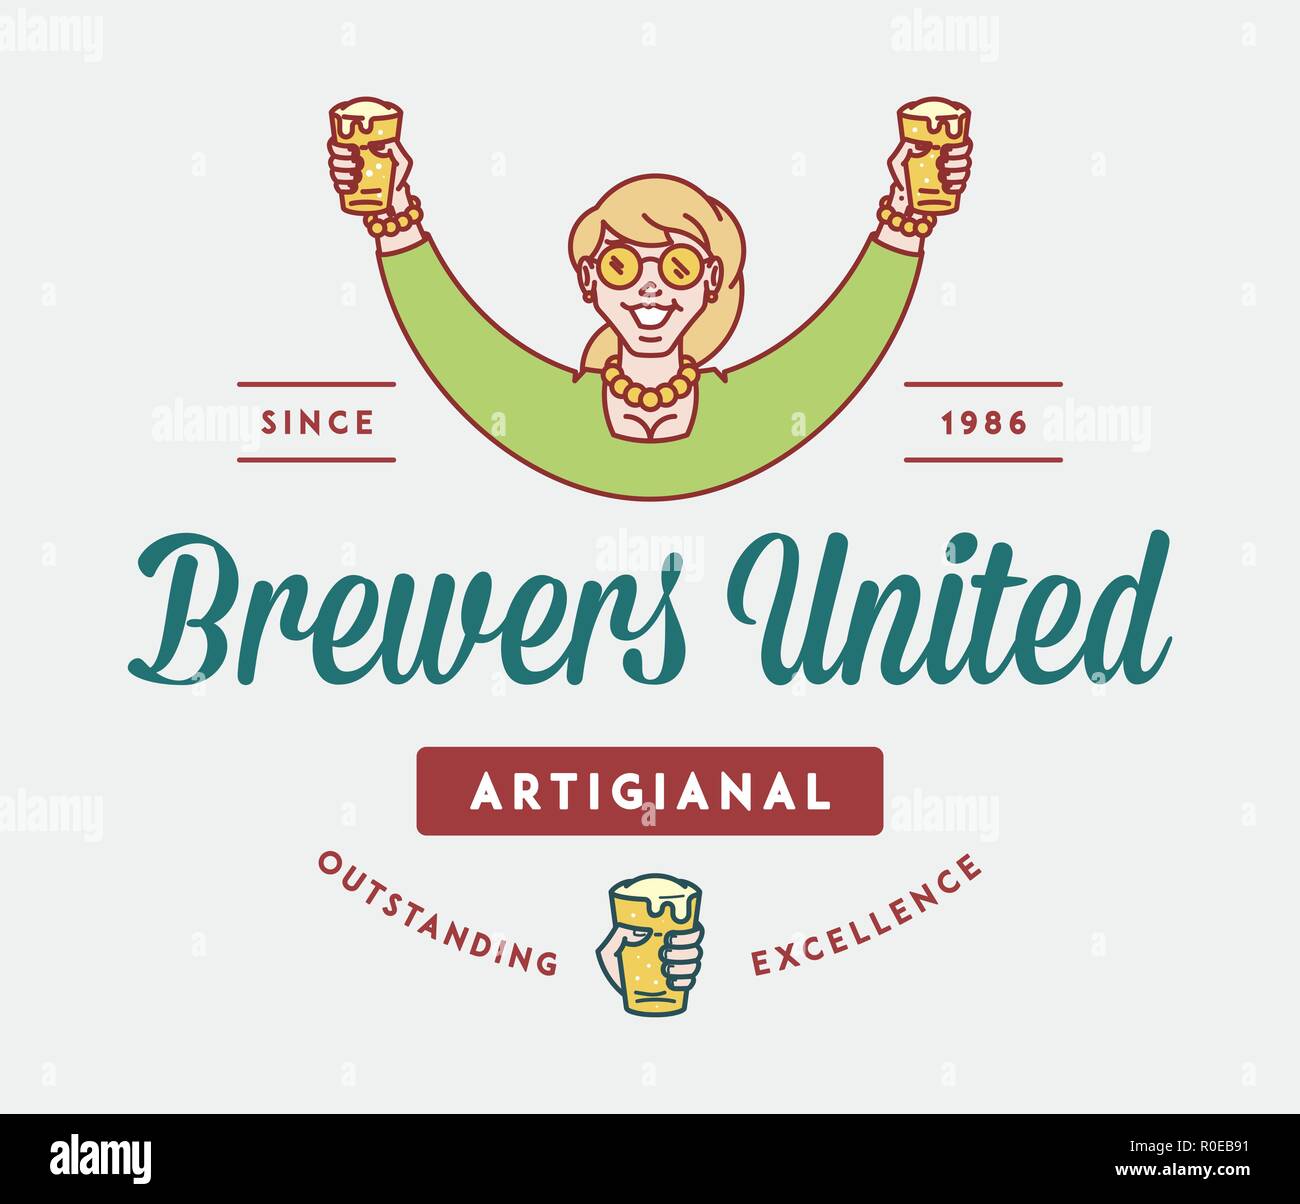 Beer brewers united is a vector illustration about drinking Stock Vector